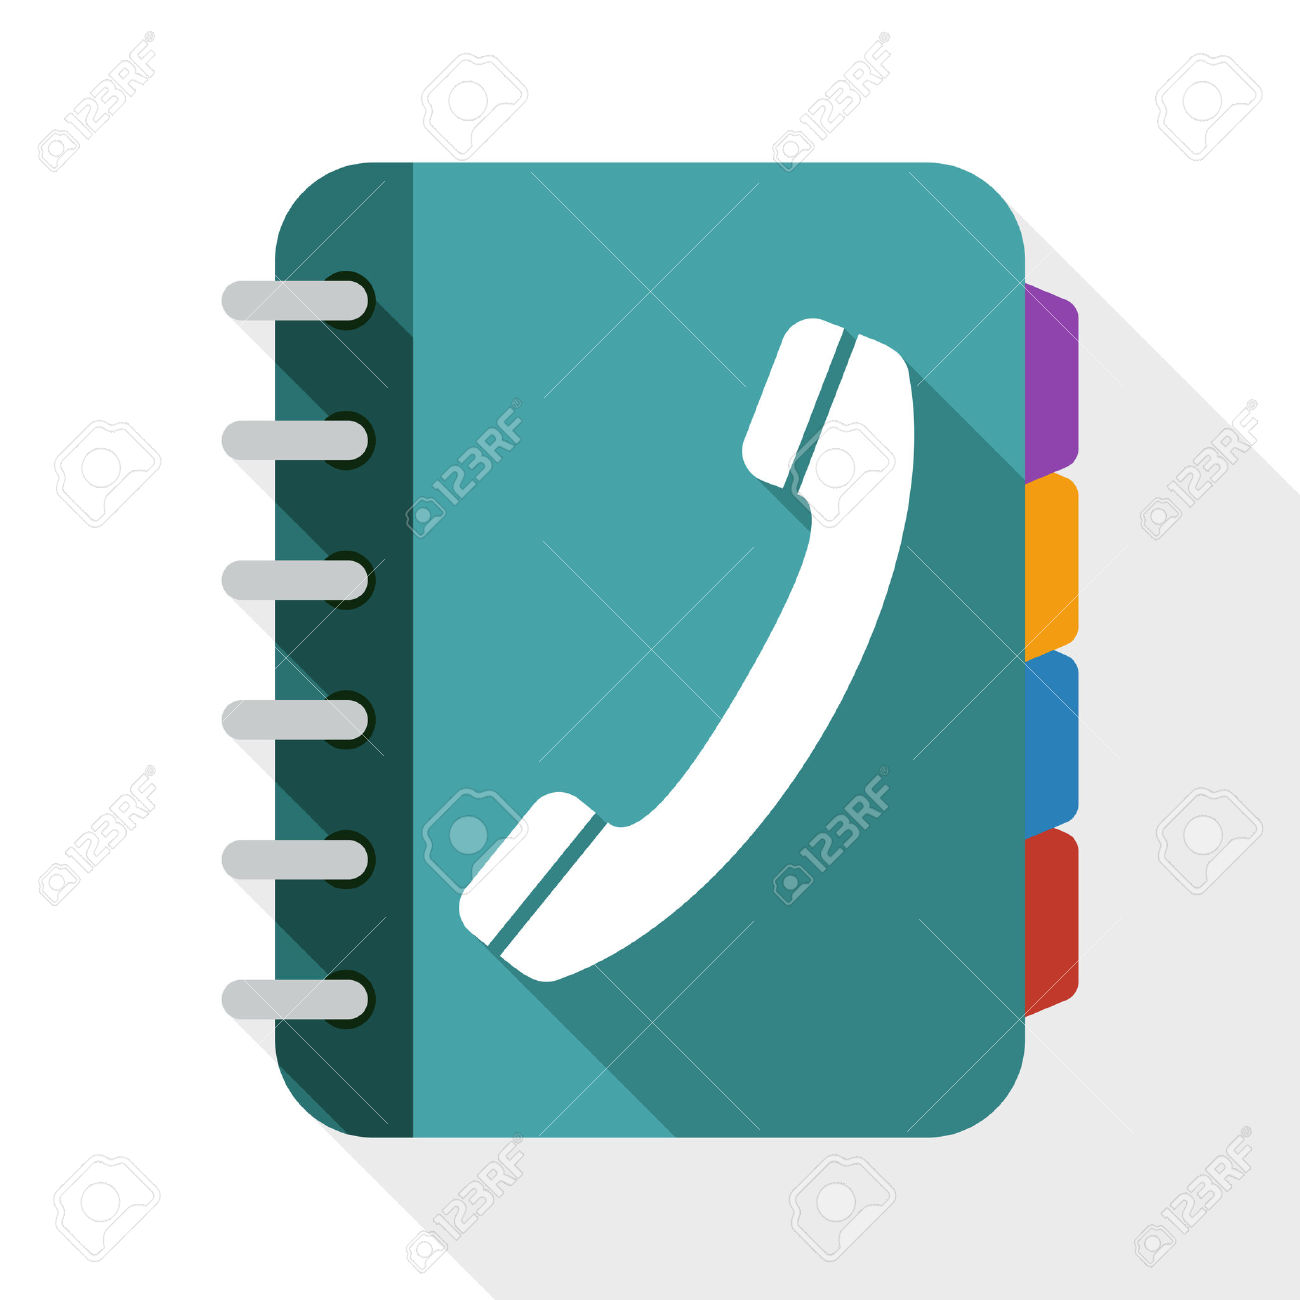 18,980 Phone Book Cliparts, Stock Vector And Royalty Free Phone.